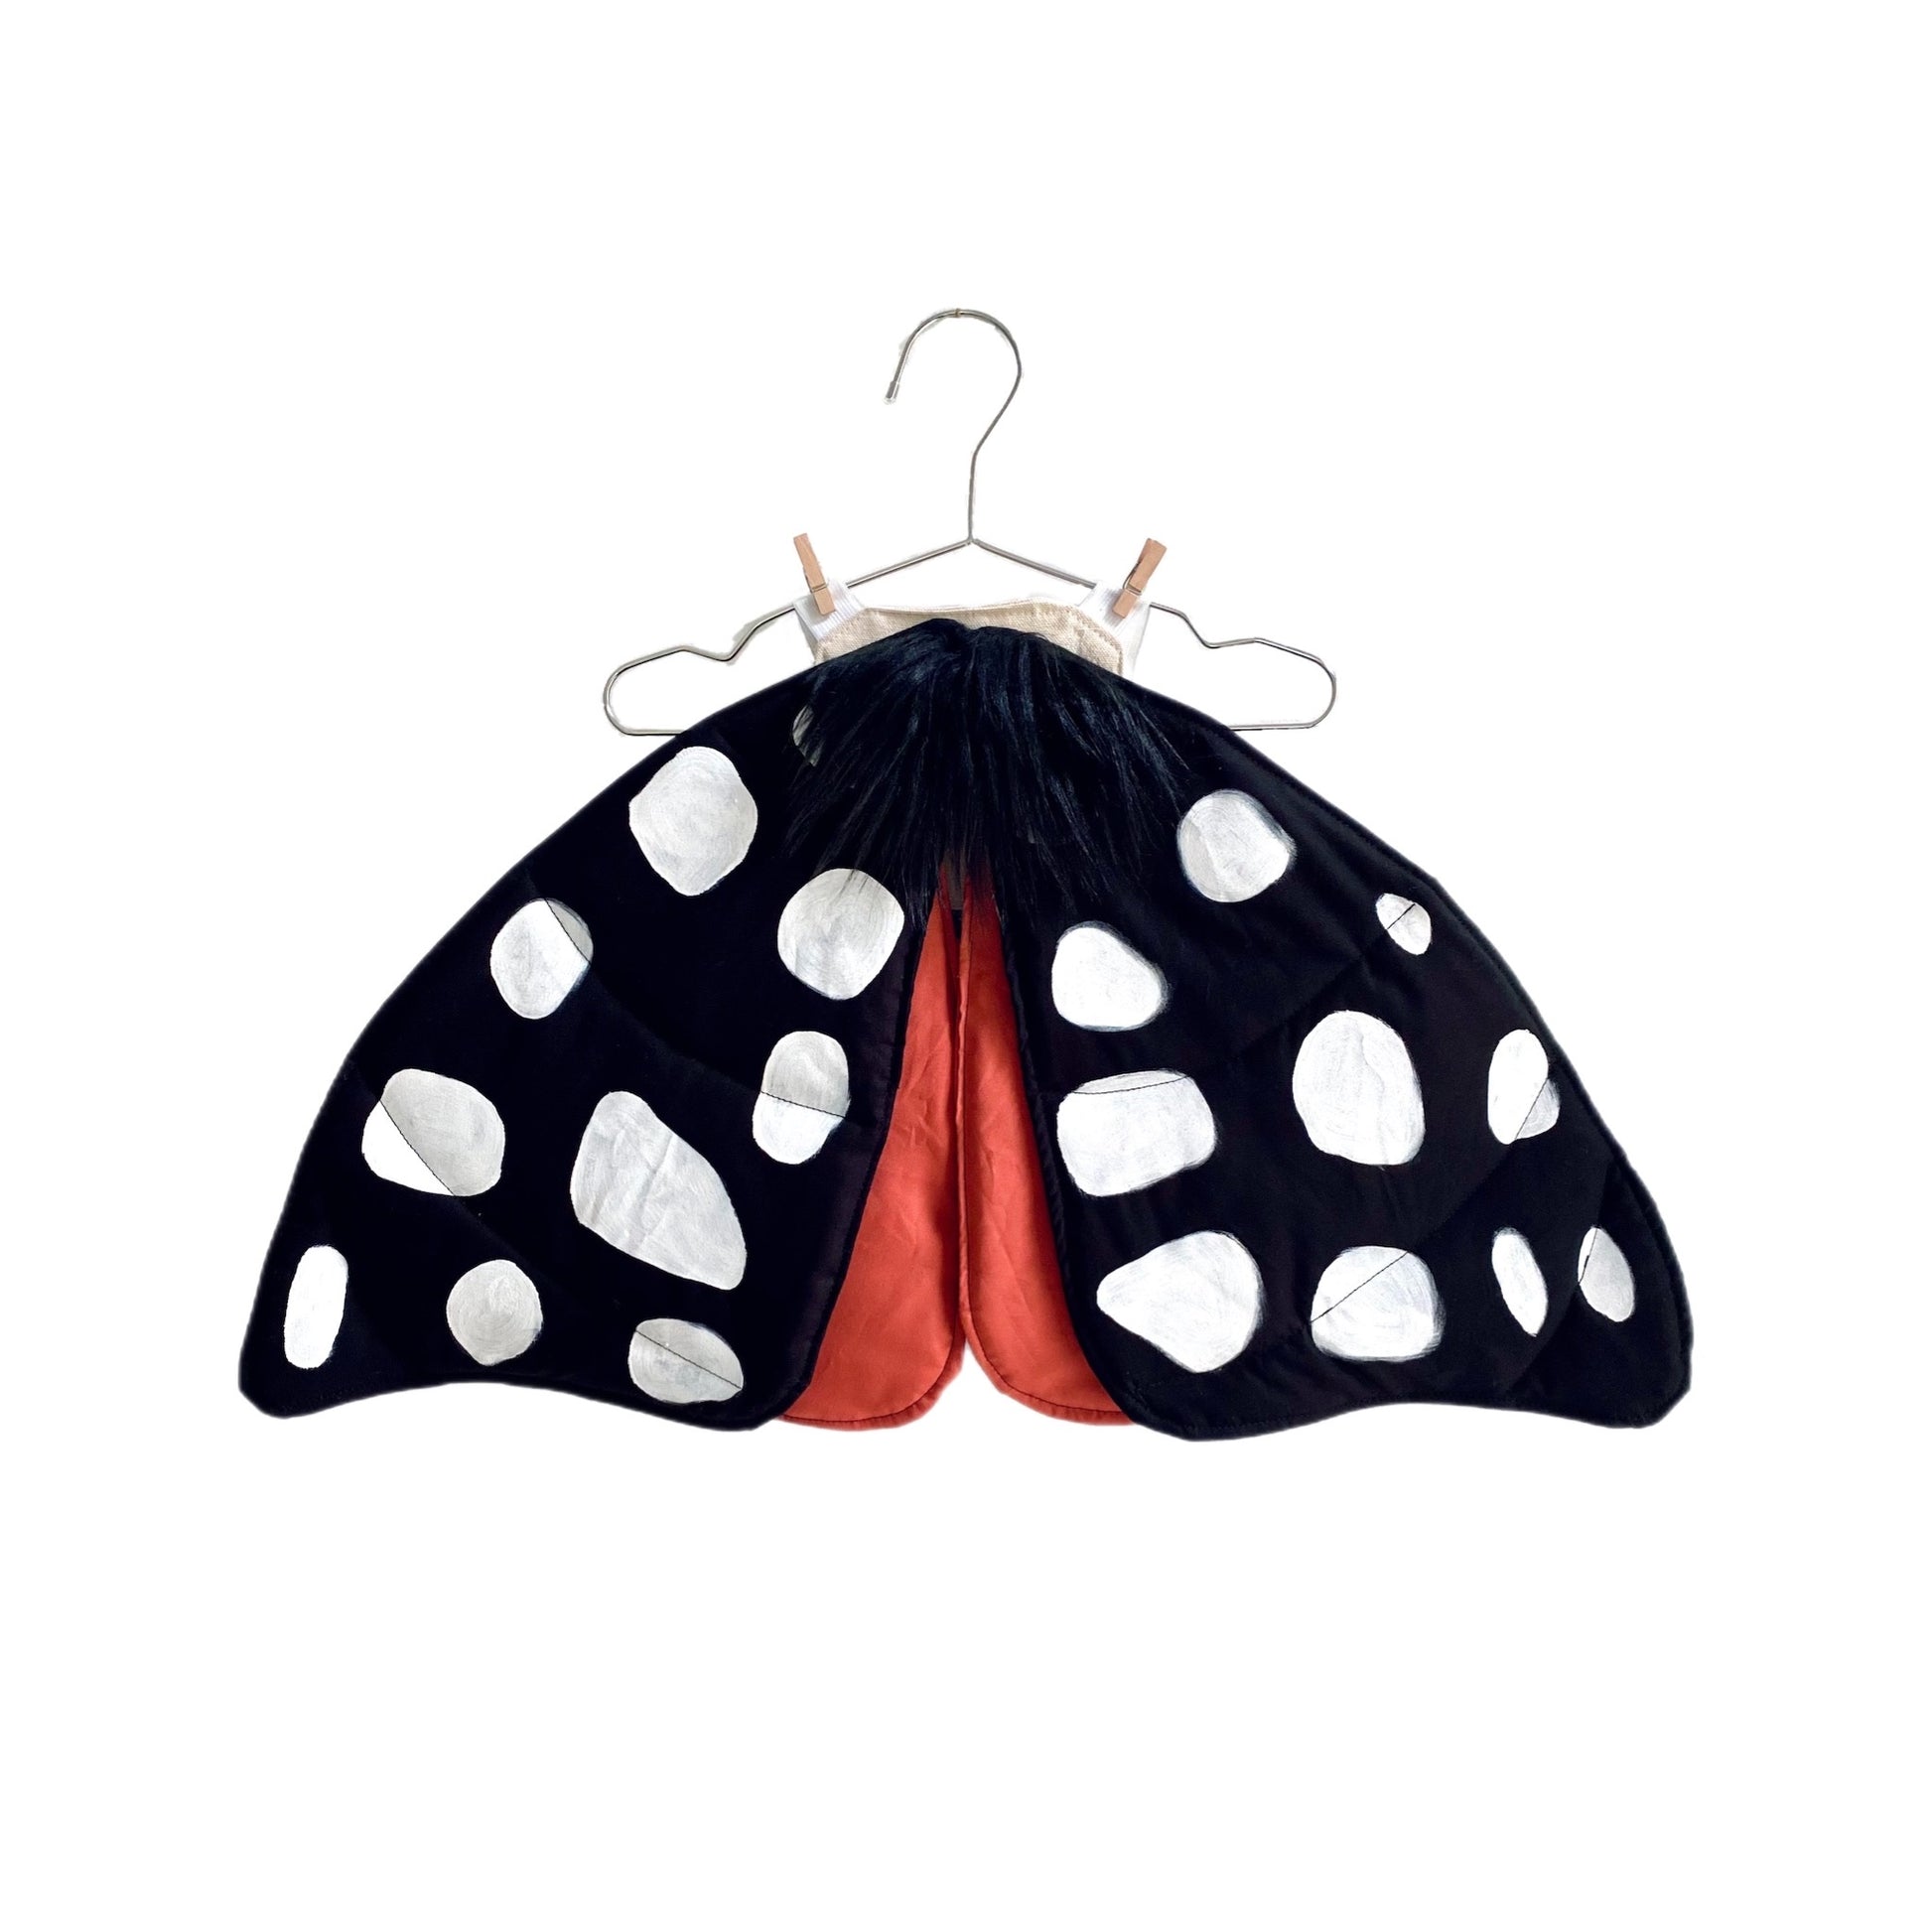 Furry black tiger moth costume wings made in the USA.